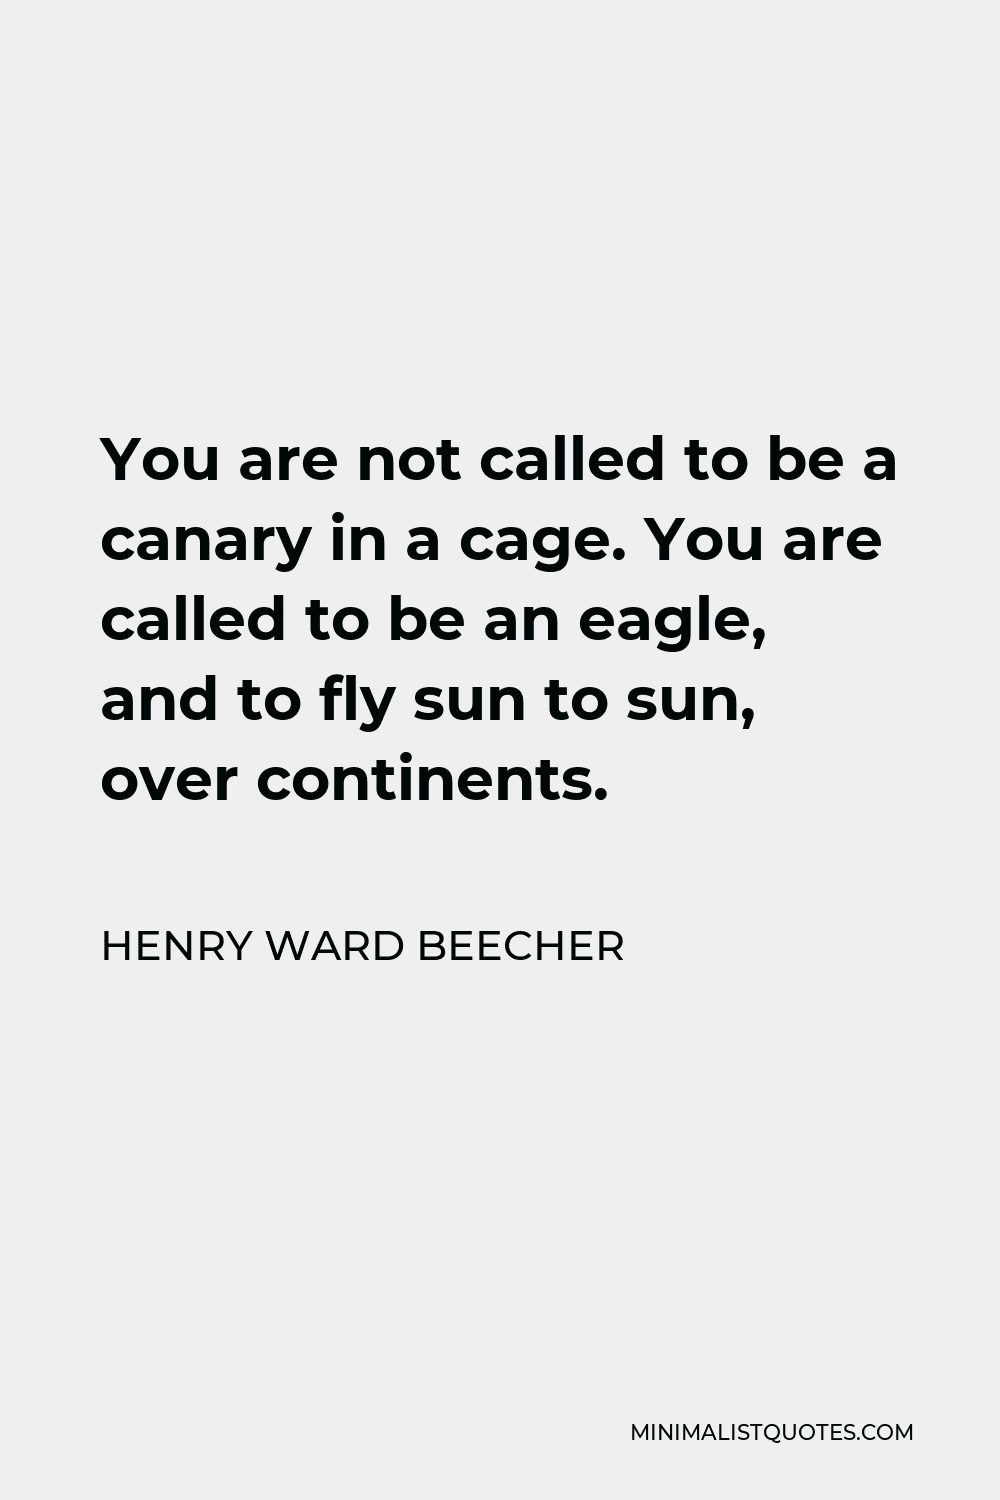 Henry Ward Beecher Quote - You are not called to be a canary in a cage. You are called to be an eagle, and to fly sun to sun, over continents.